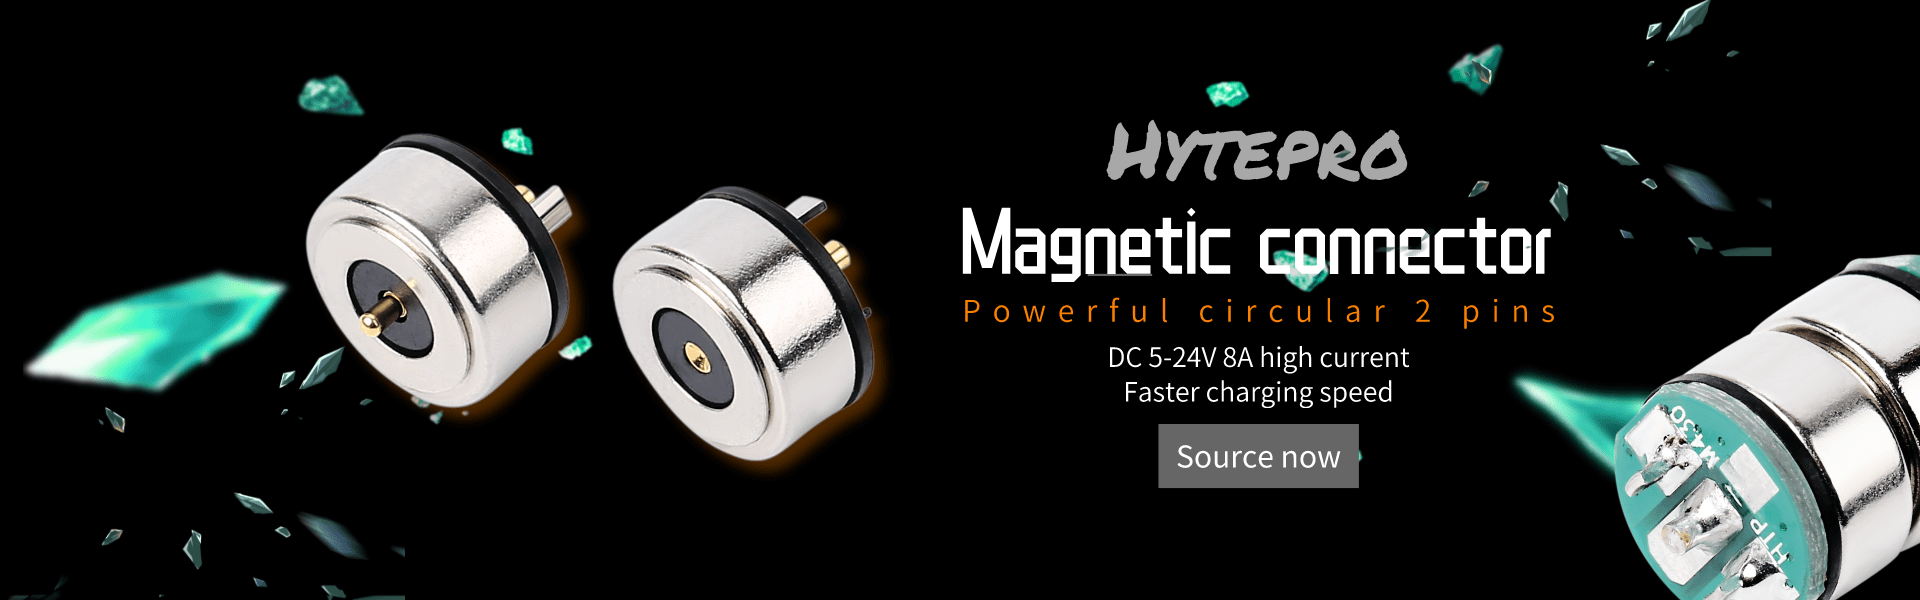 Professional Magnetic Connectors Manufacturer - HytePro